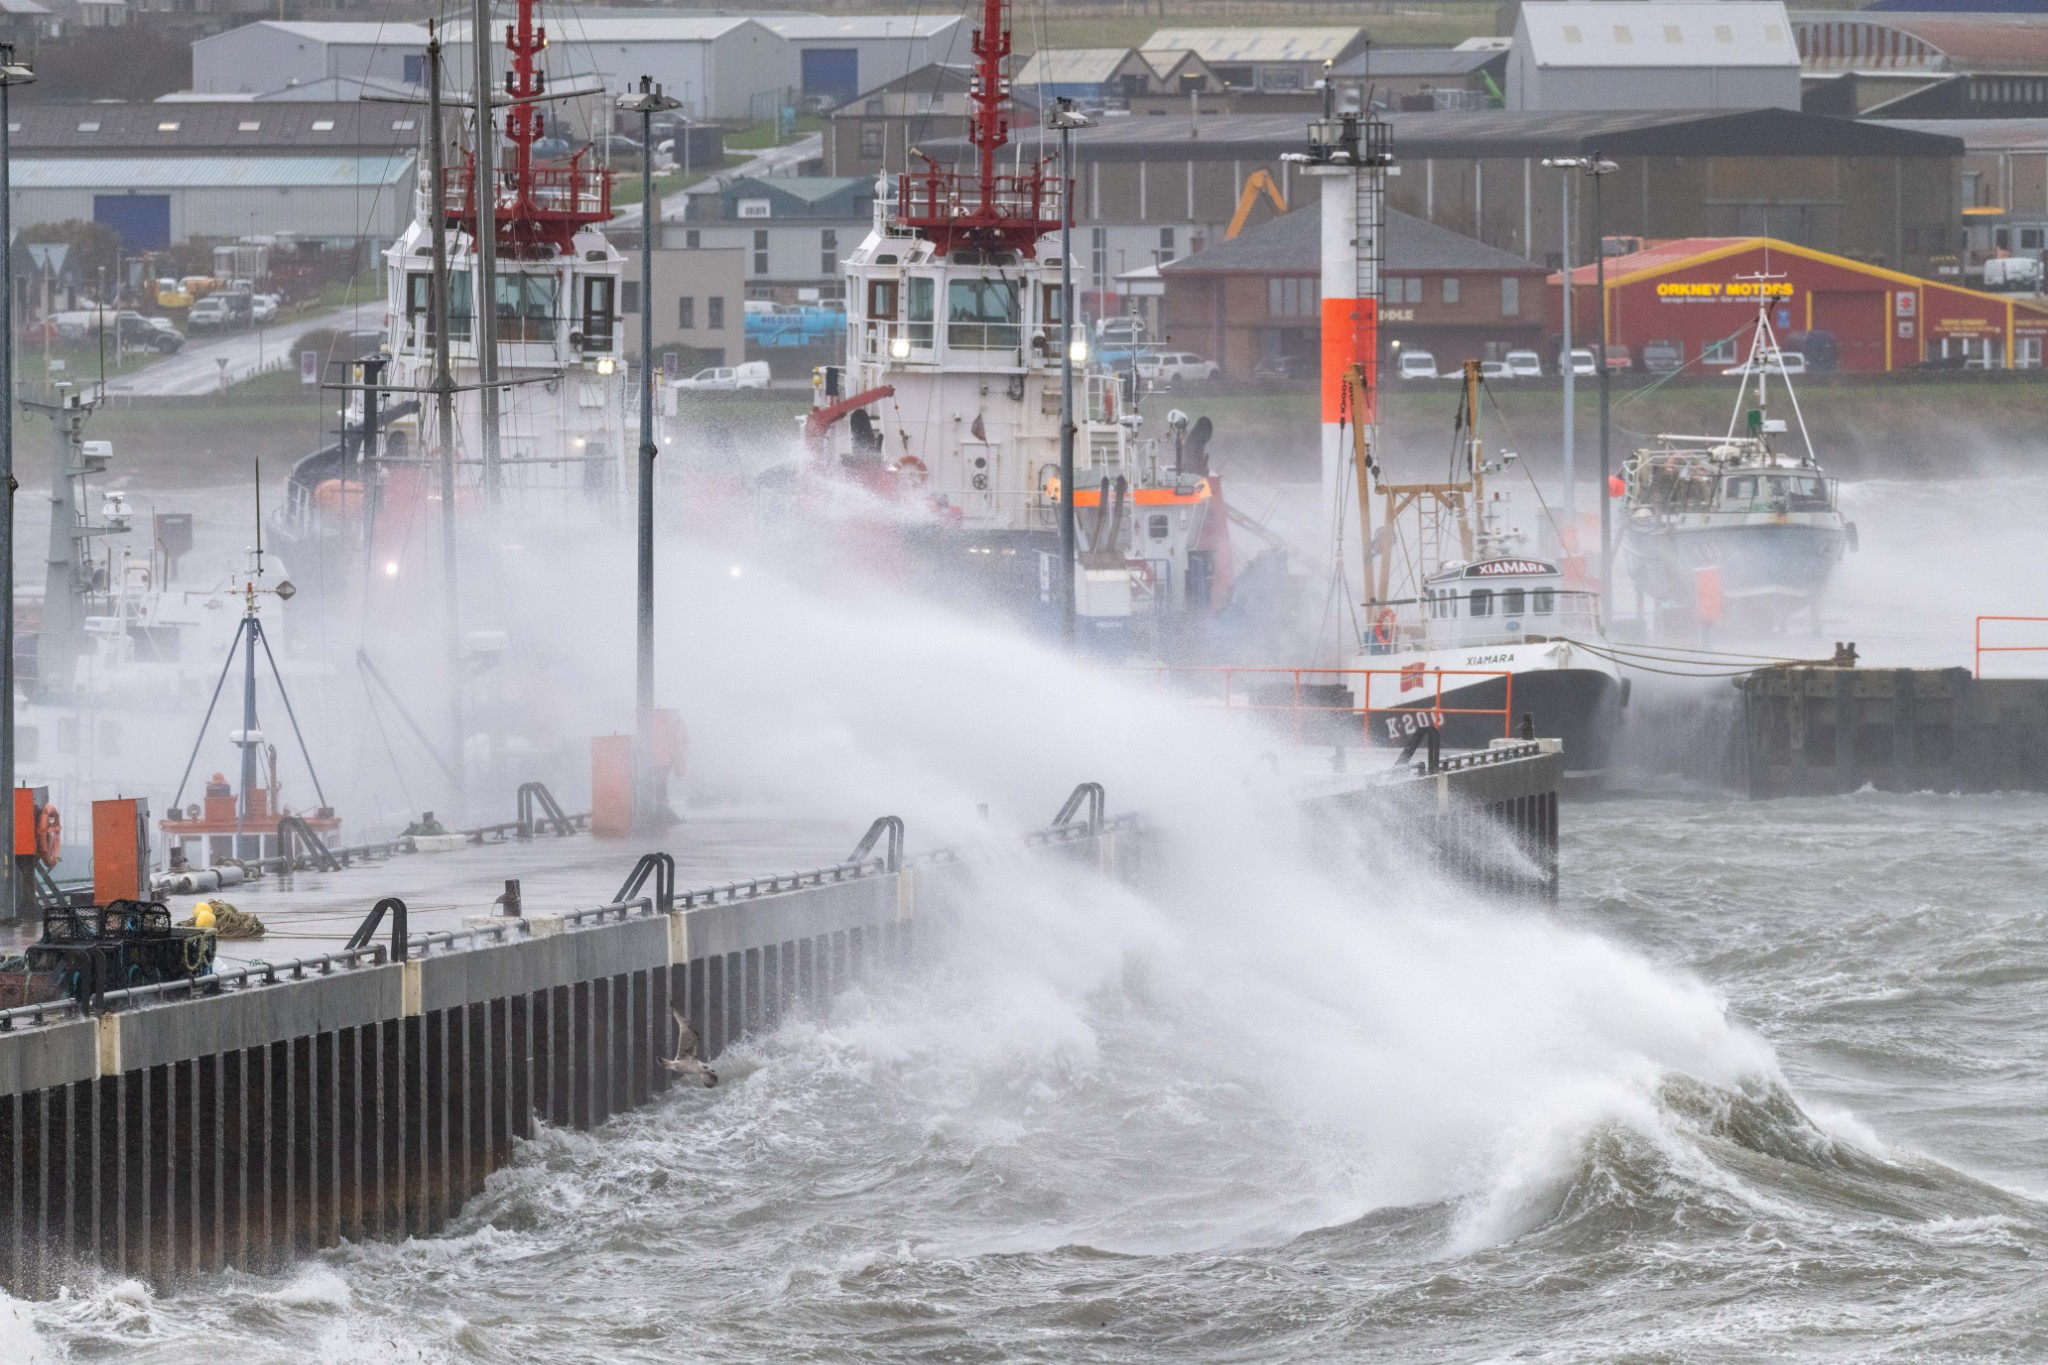 Waves overtopping the pier in Kirkwall - images by Raymond Besant